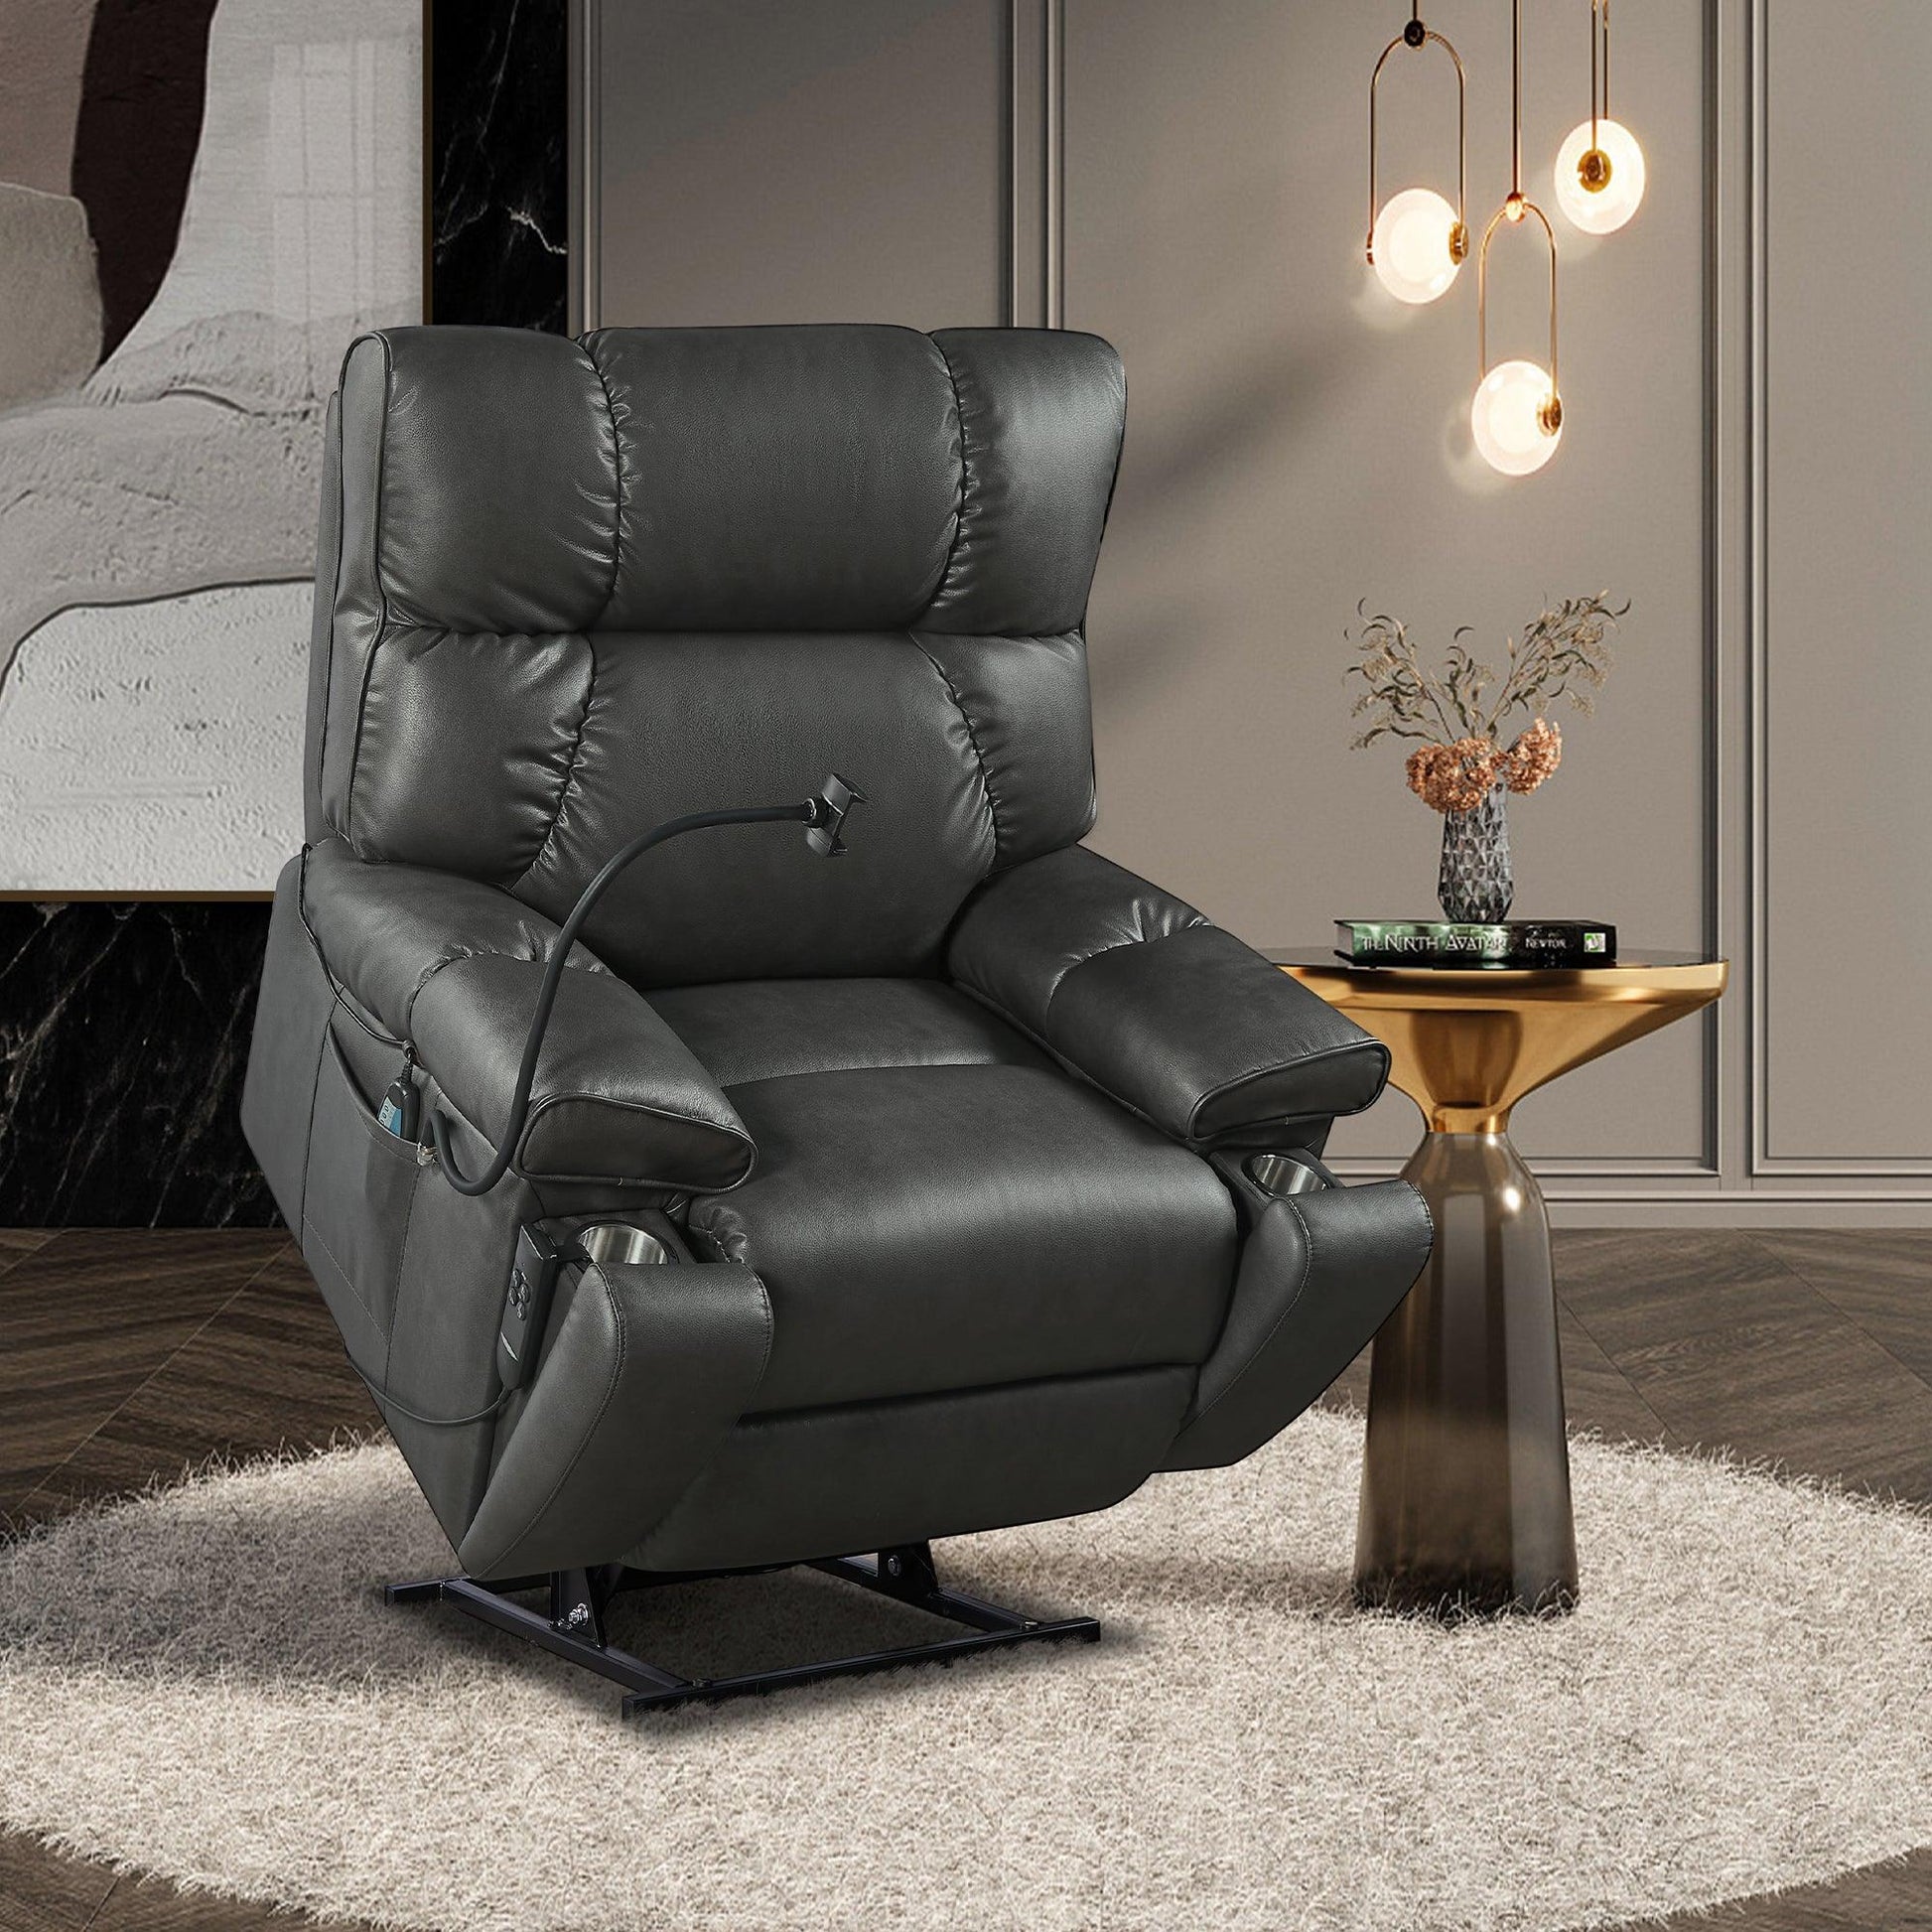 Electric Power Lift Recliner Chair with Massage, Heat, Phone Holder, and Integrated Cup Holders, Gray FredCo